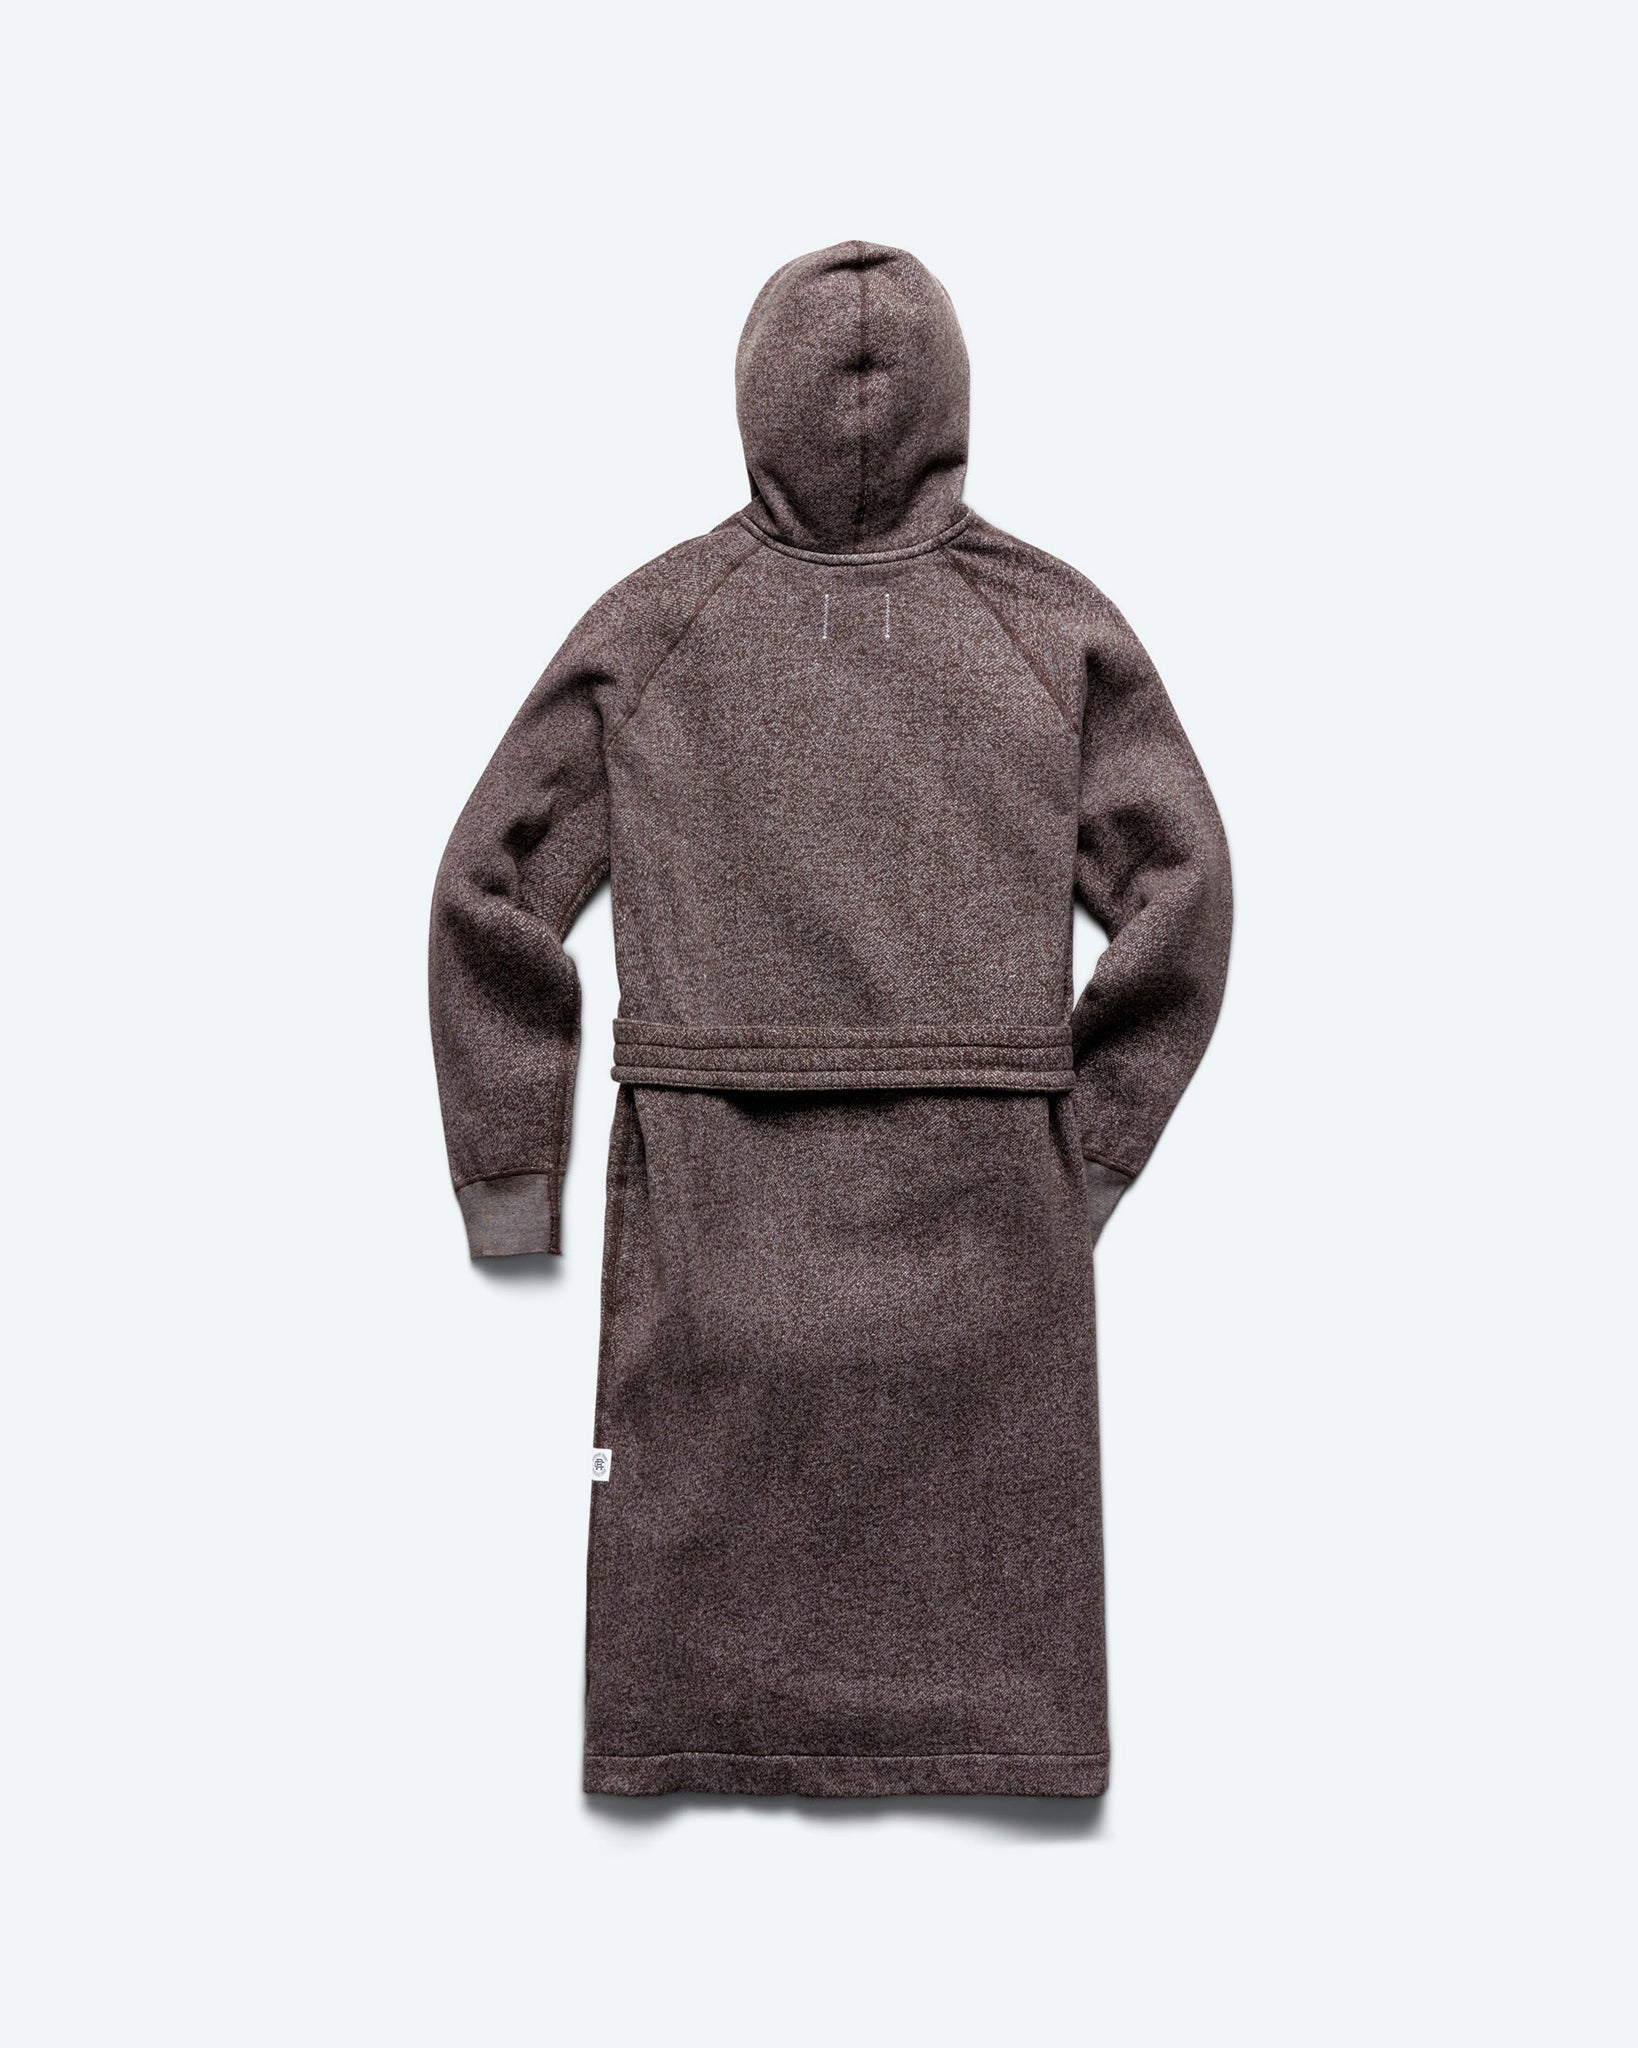 Tiger Fleece Hooded Robe | Reigning Champ